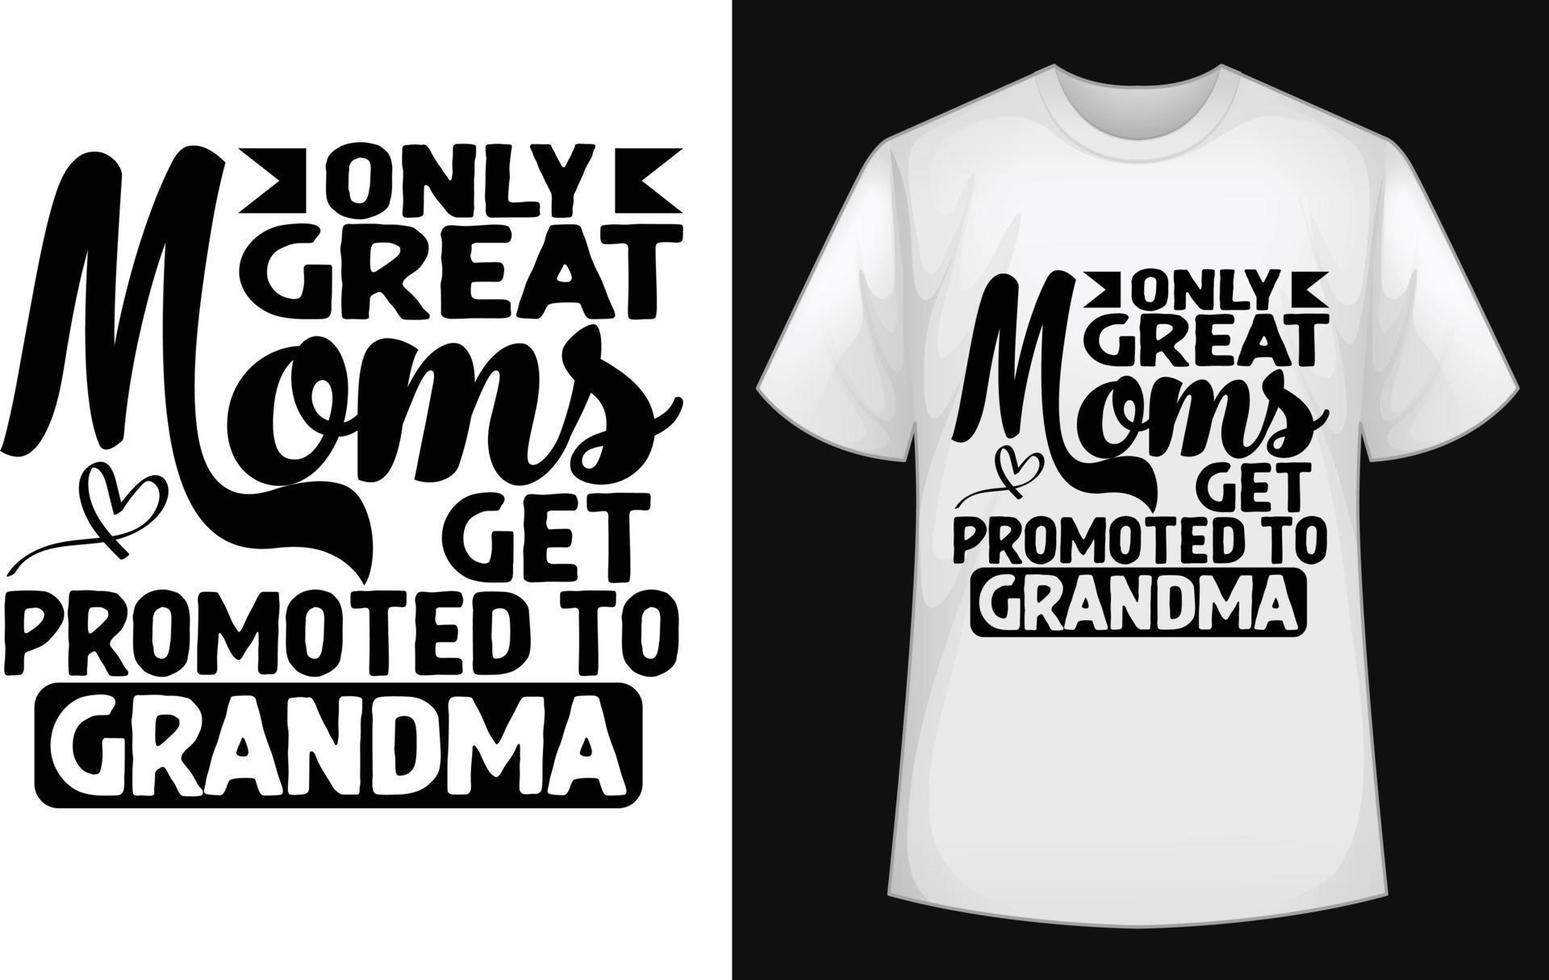 Only great moms get promoted to grandma typographic t shirt design vector for free